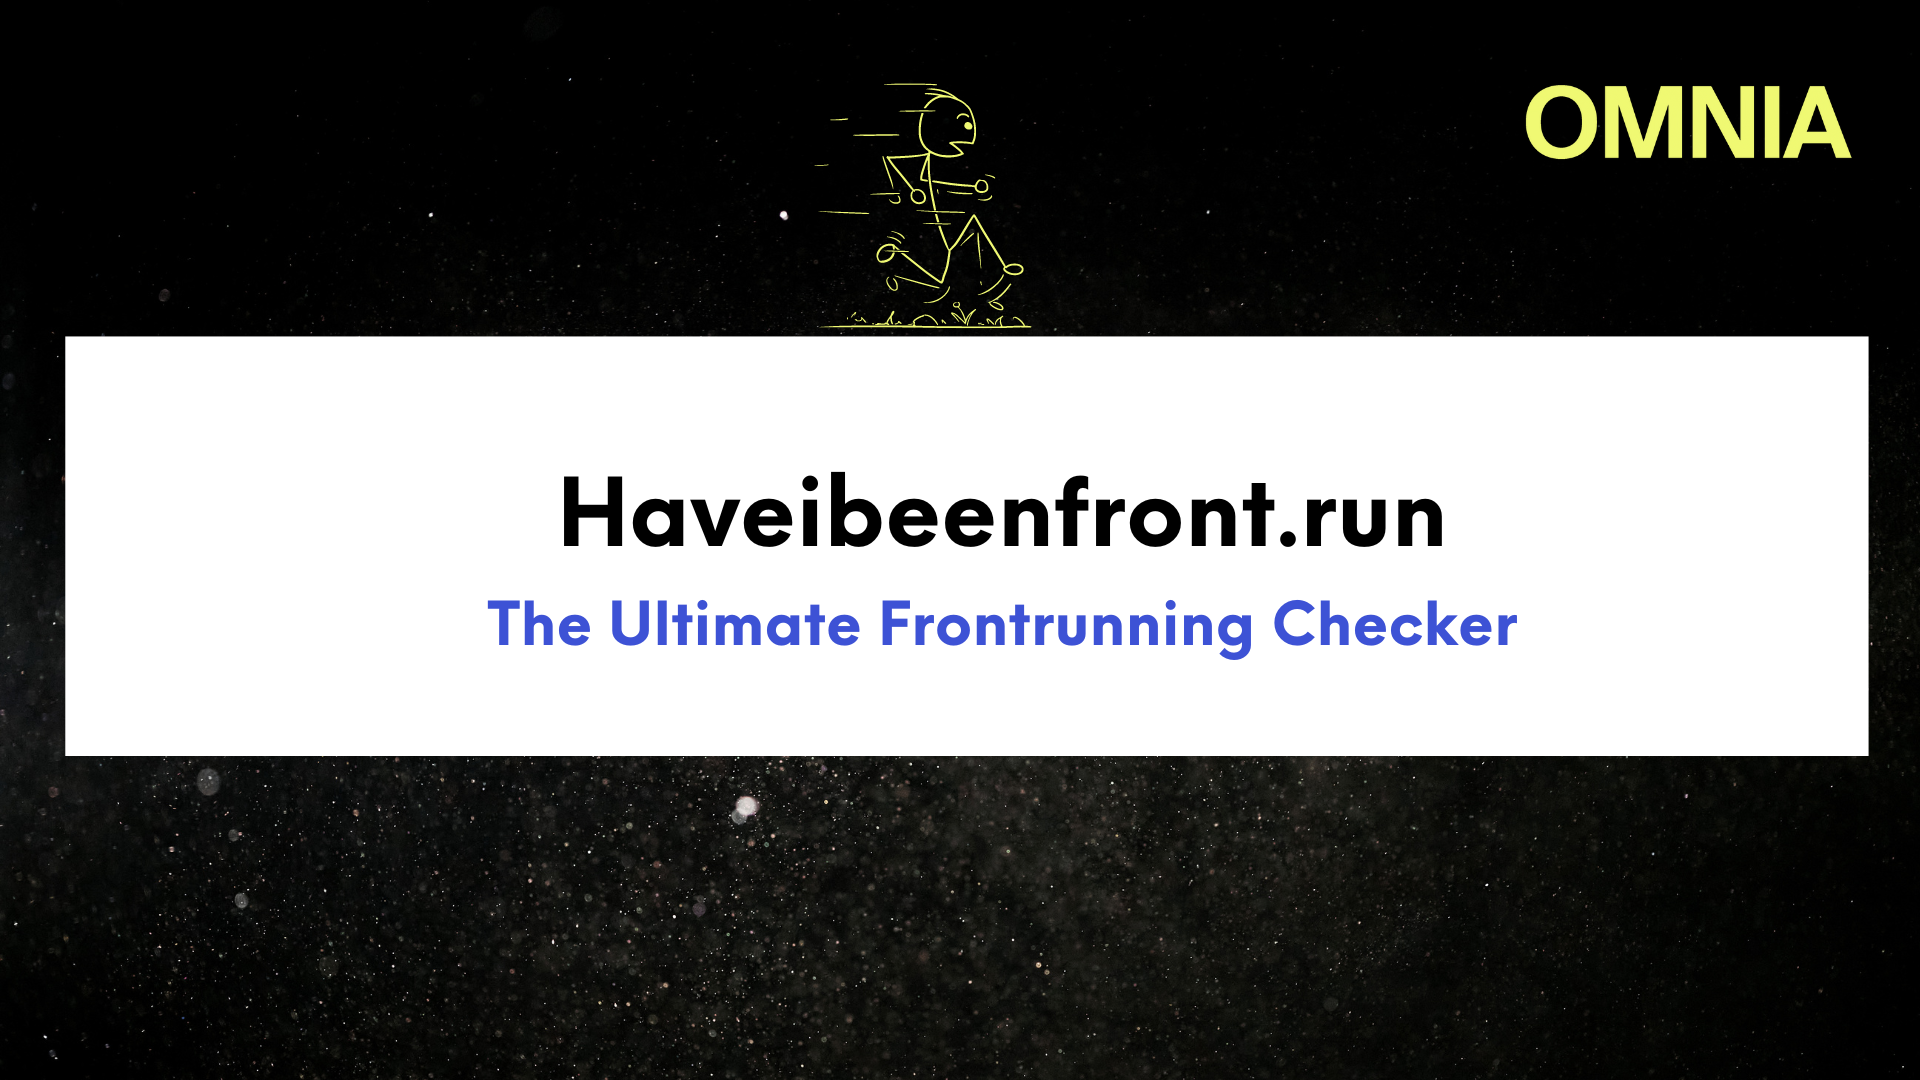 ‘HaveIBeenFront.run’: The Ultimate Frontrunning Checker